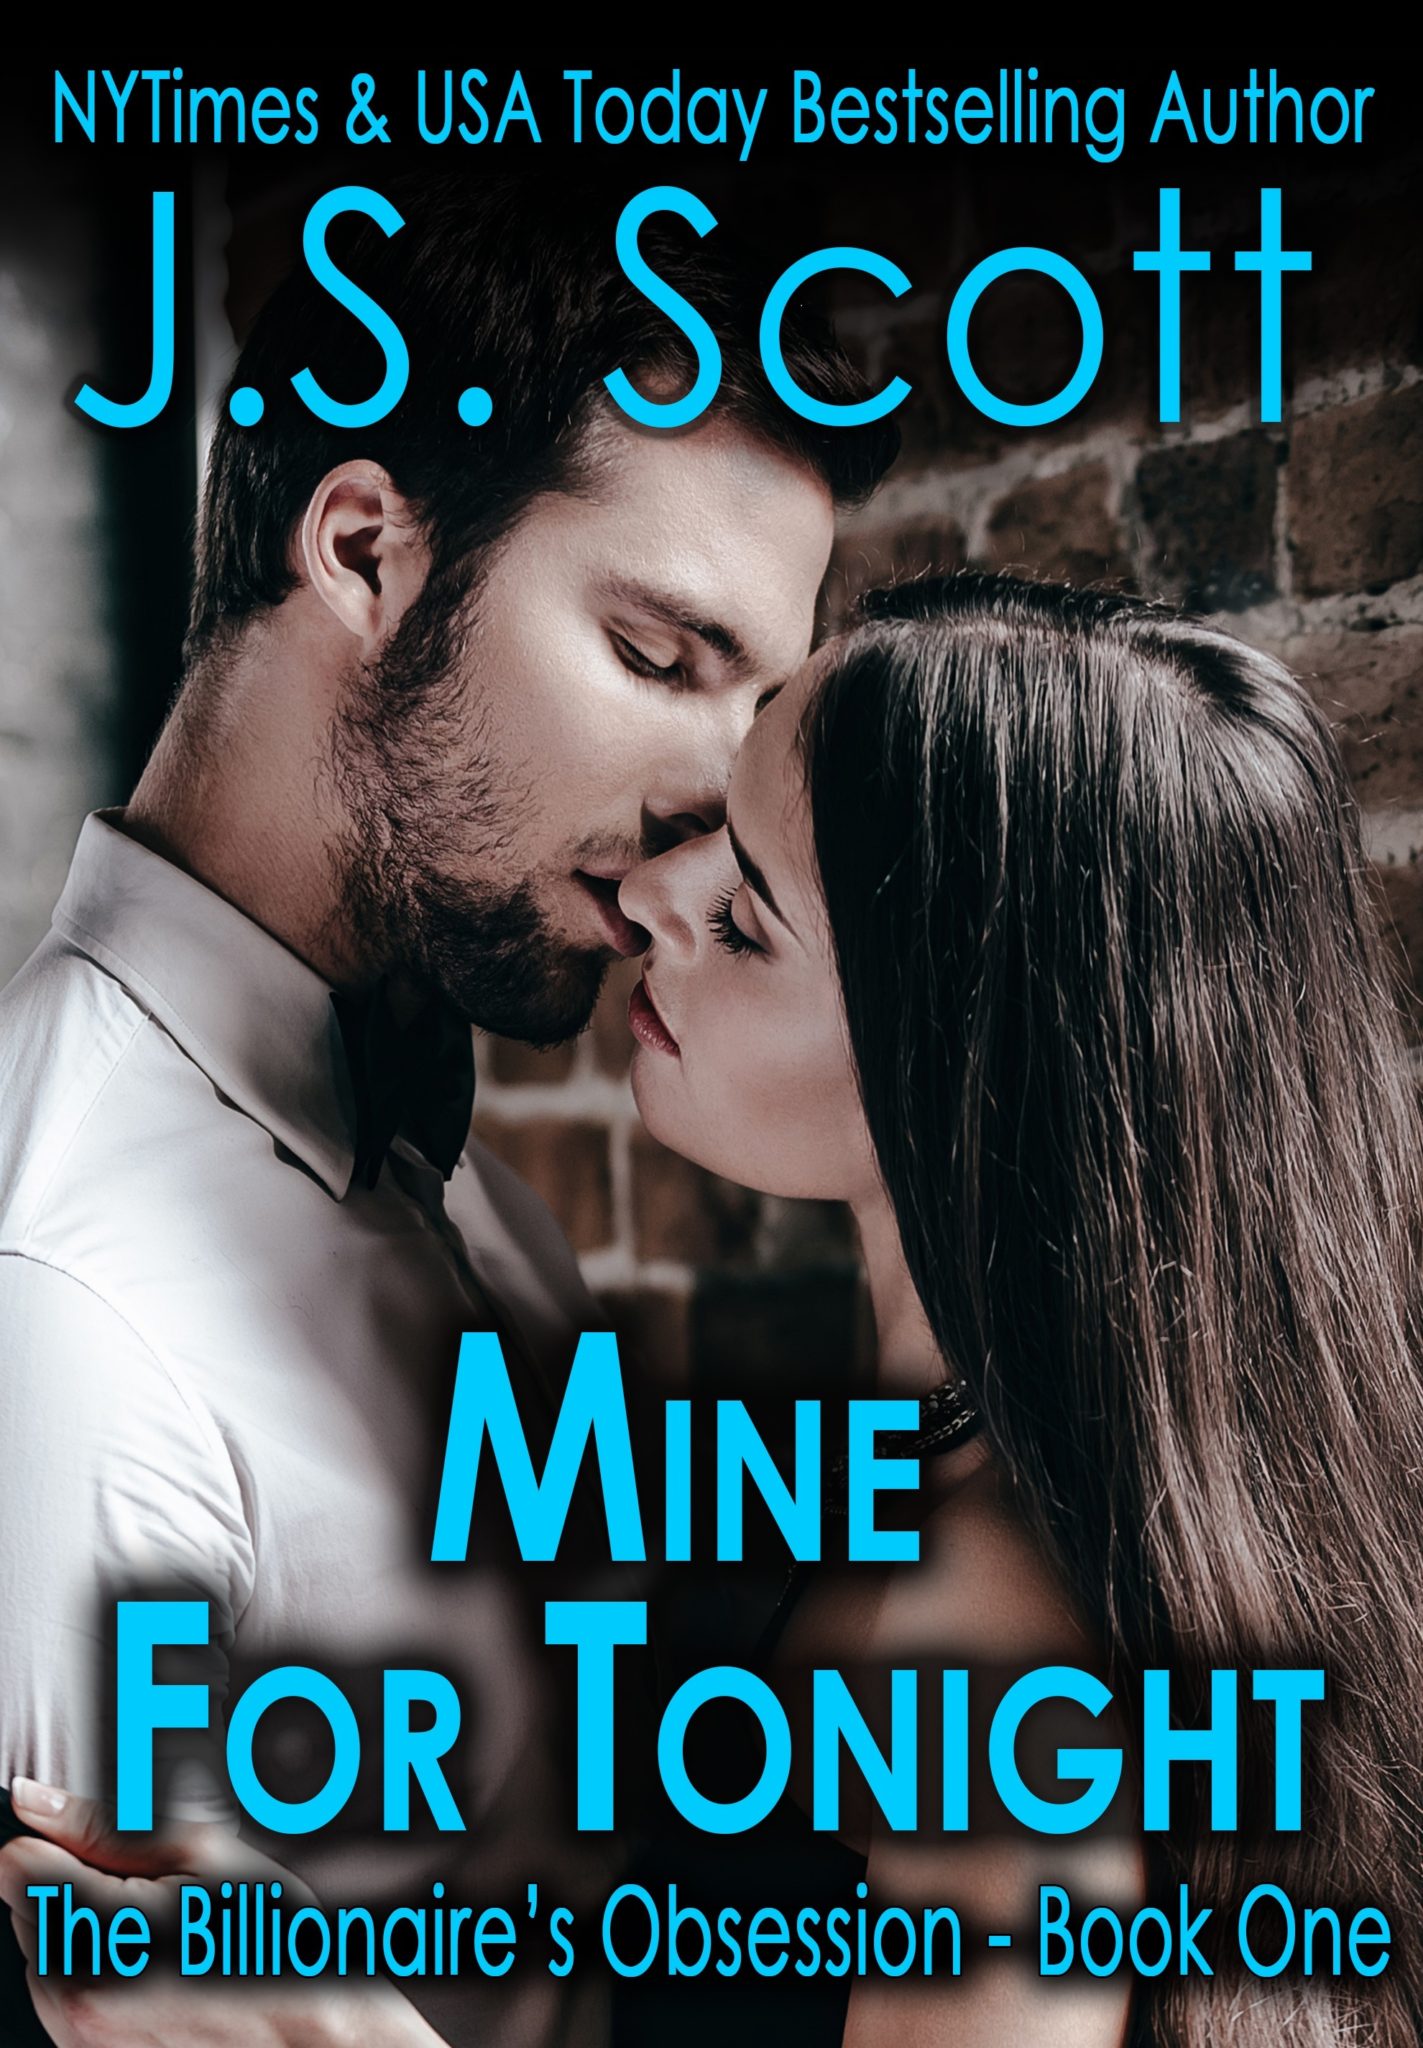 FREE: Mine for Tonight (The Billionaire’s Obsession, Book 1) by J.S. SCOTT by J.S, SCOTT